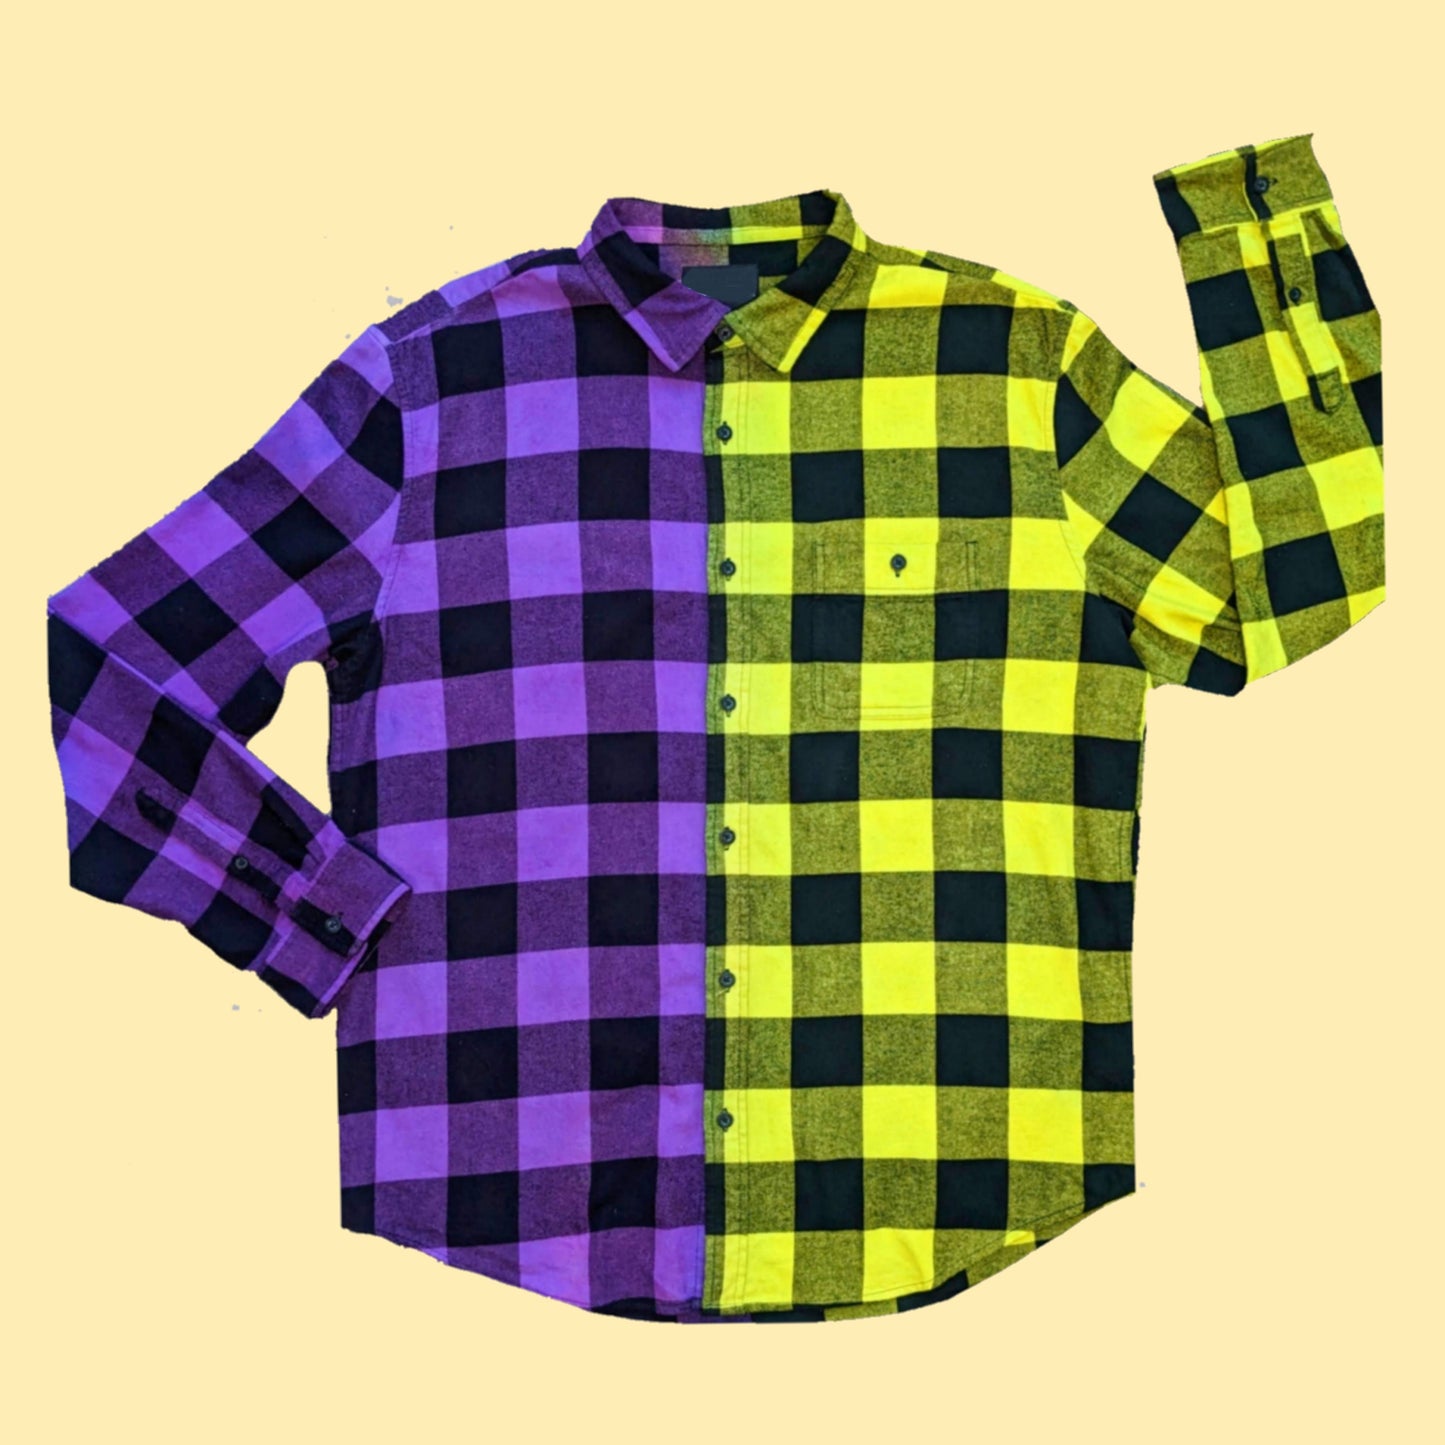 Half Neon Yellow, Purple Tie Dye Buffalo Plaid Flannel Shirt for men and women. Color Block Flannel is Bright and unique. Handmade with quality fiber reactive dyes for vibrant color that lasts.100% Cotton Soft Flannel Fabric, Collar Neckline,  Button Closure, Long Sleeves, front pocket, Machine washable